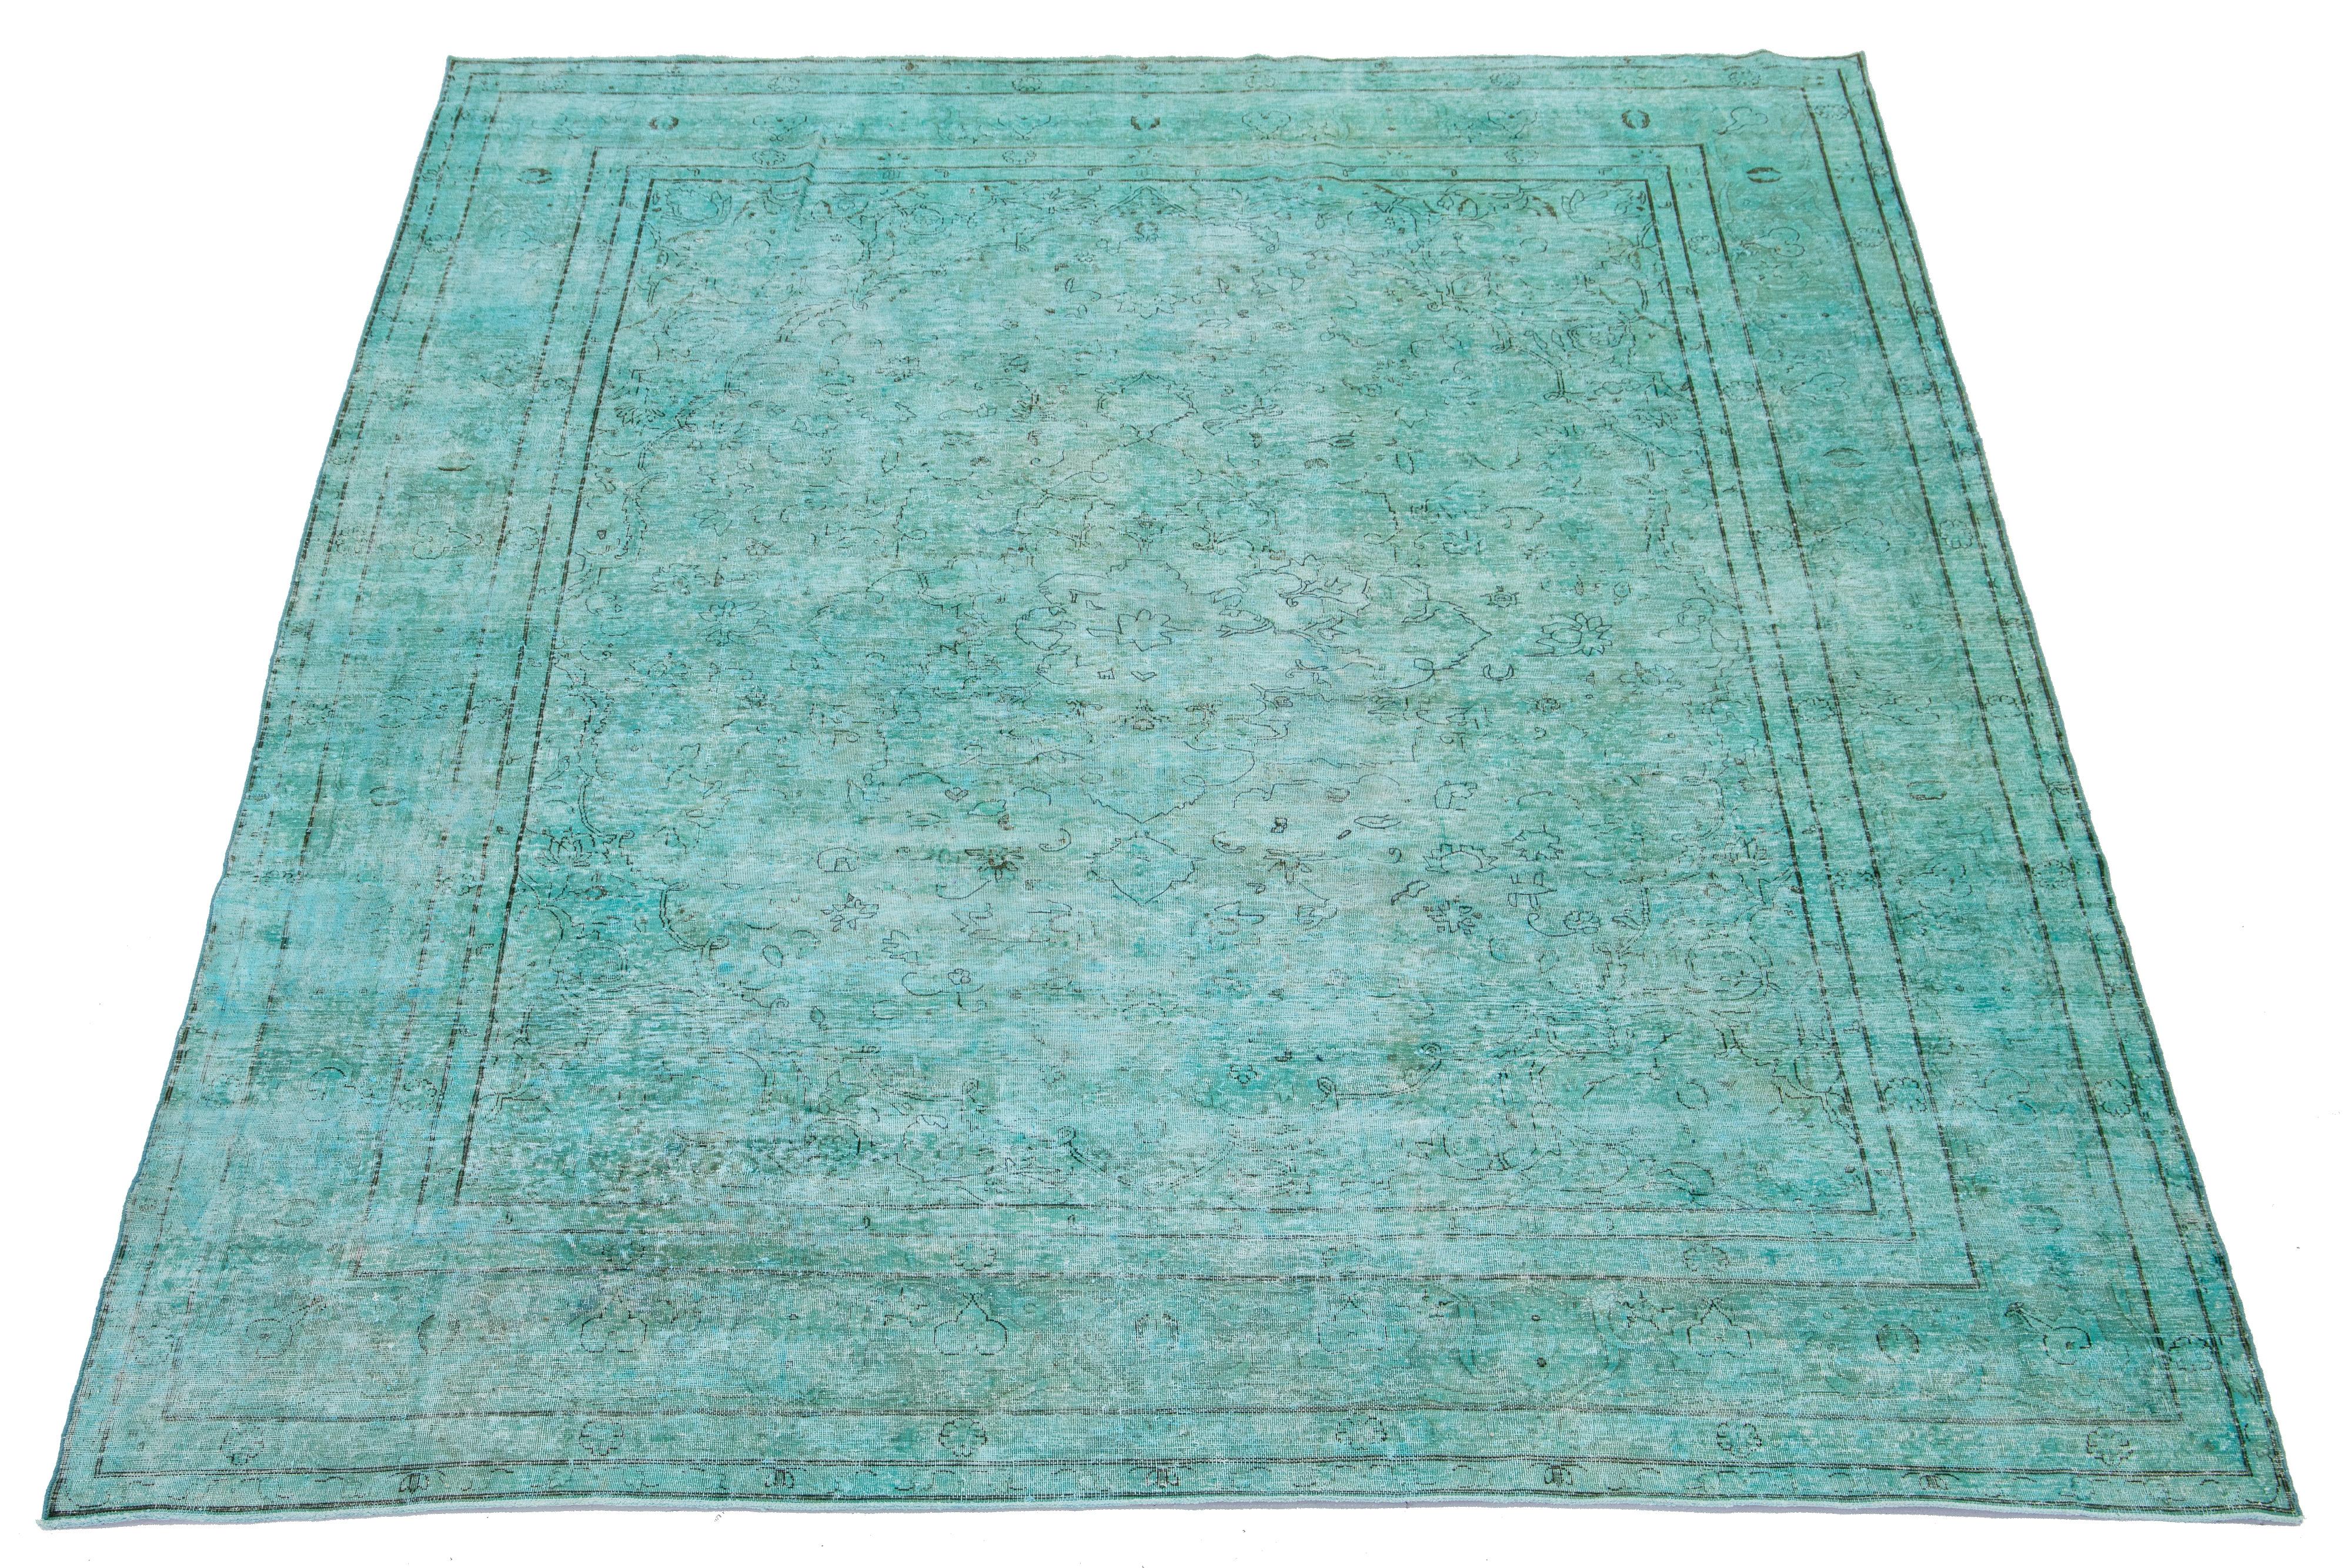 This is an antique hand-knotted wool Persian rug with a Turquoise field. It features an all-over floral design with gray accents.

This rug measures 8'5'' x 11'1